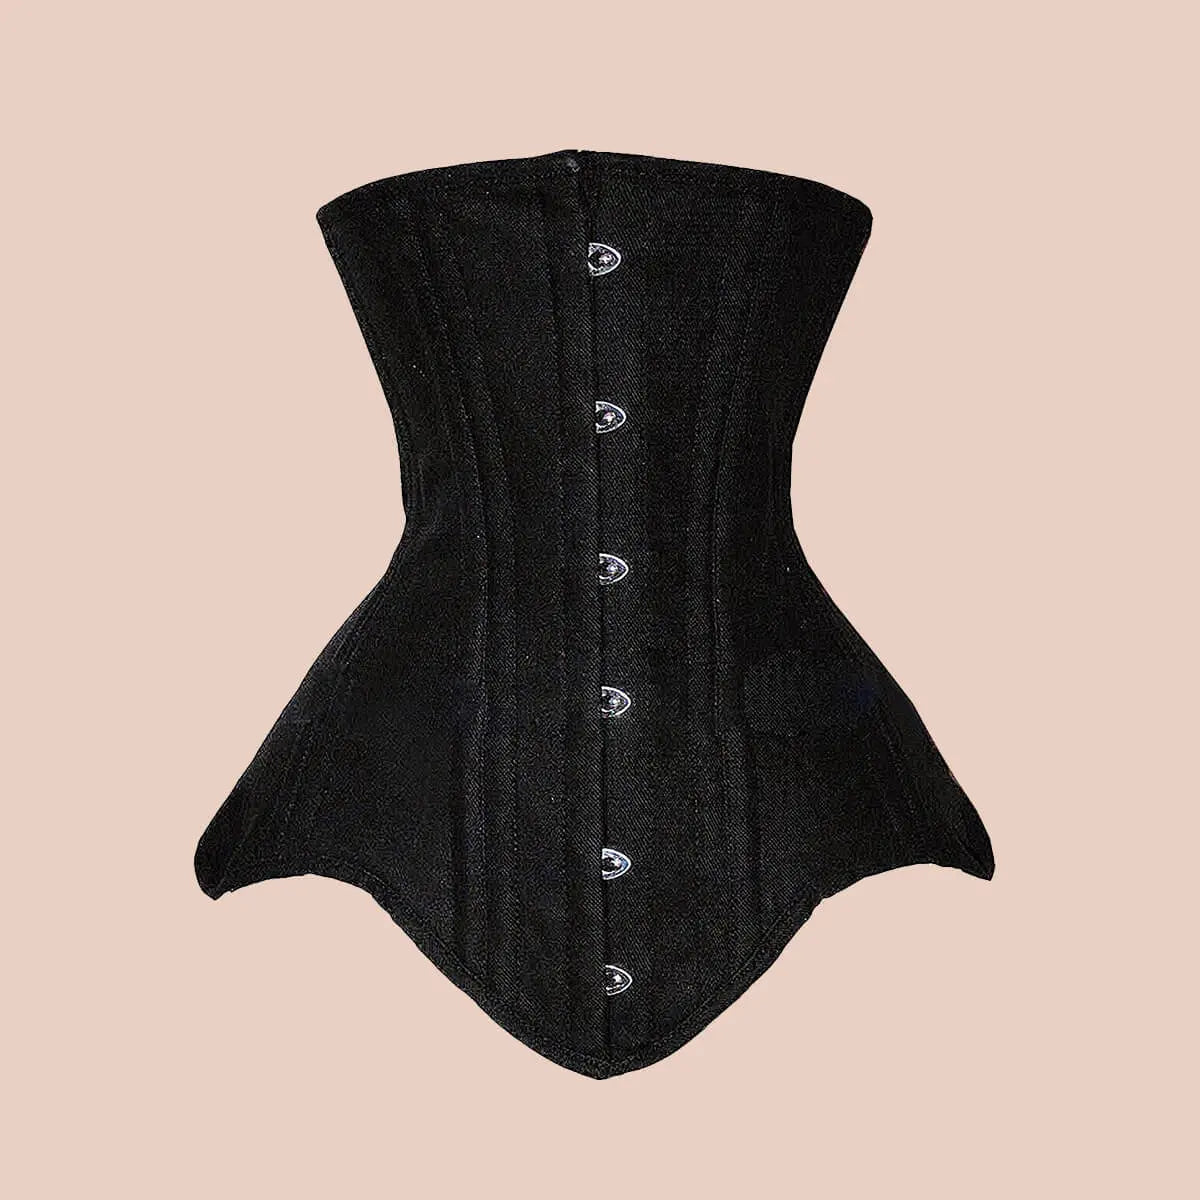 Shop beautiful, authentic steel boned corsets. We design the best waist  trainer corsets for dedicated cors…